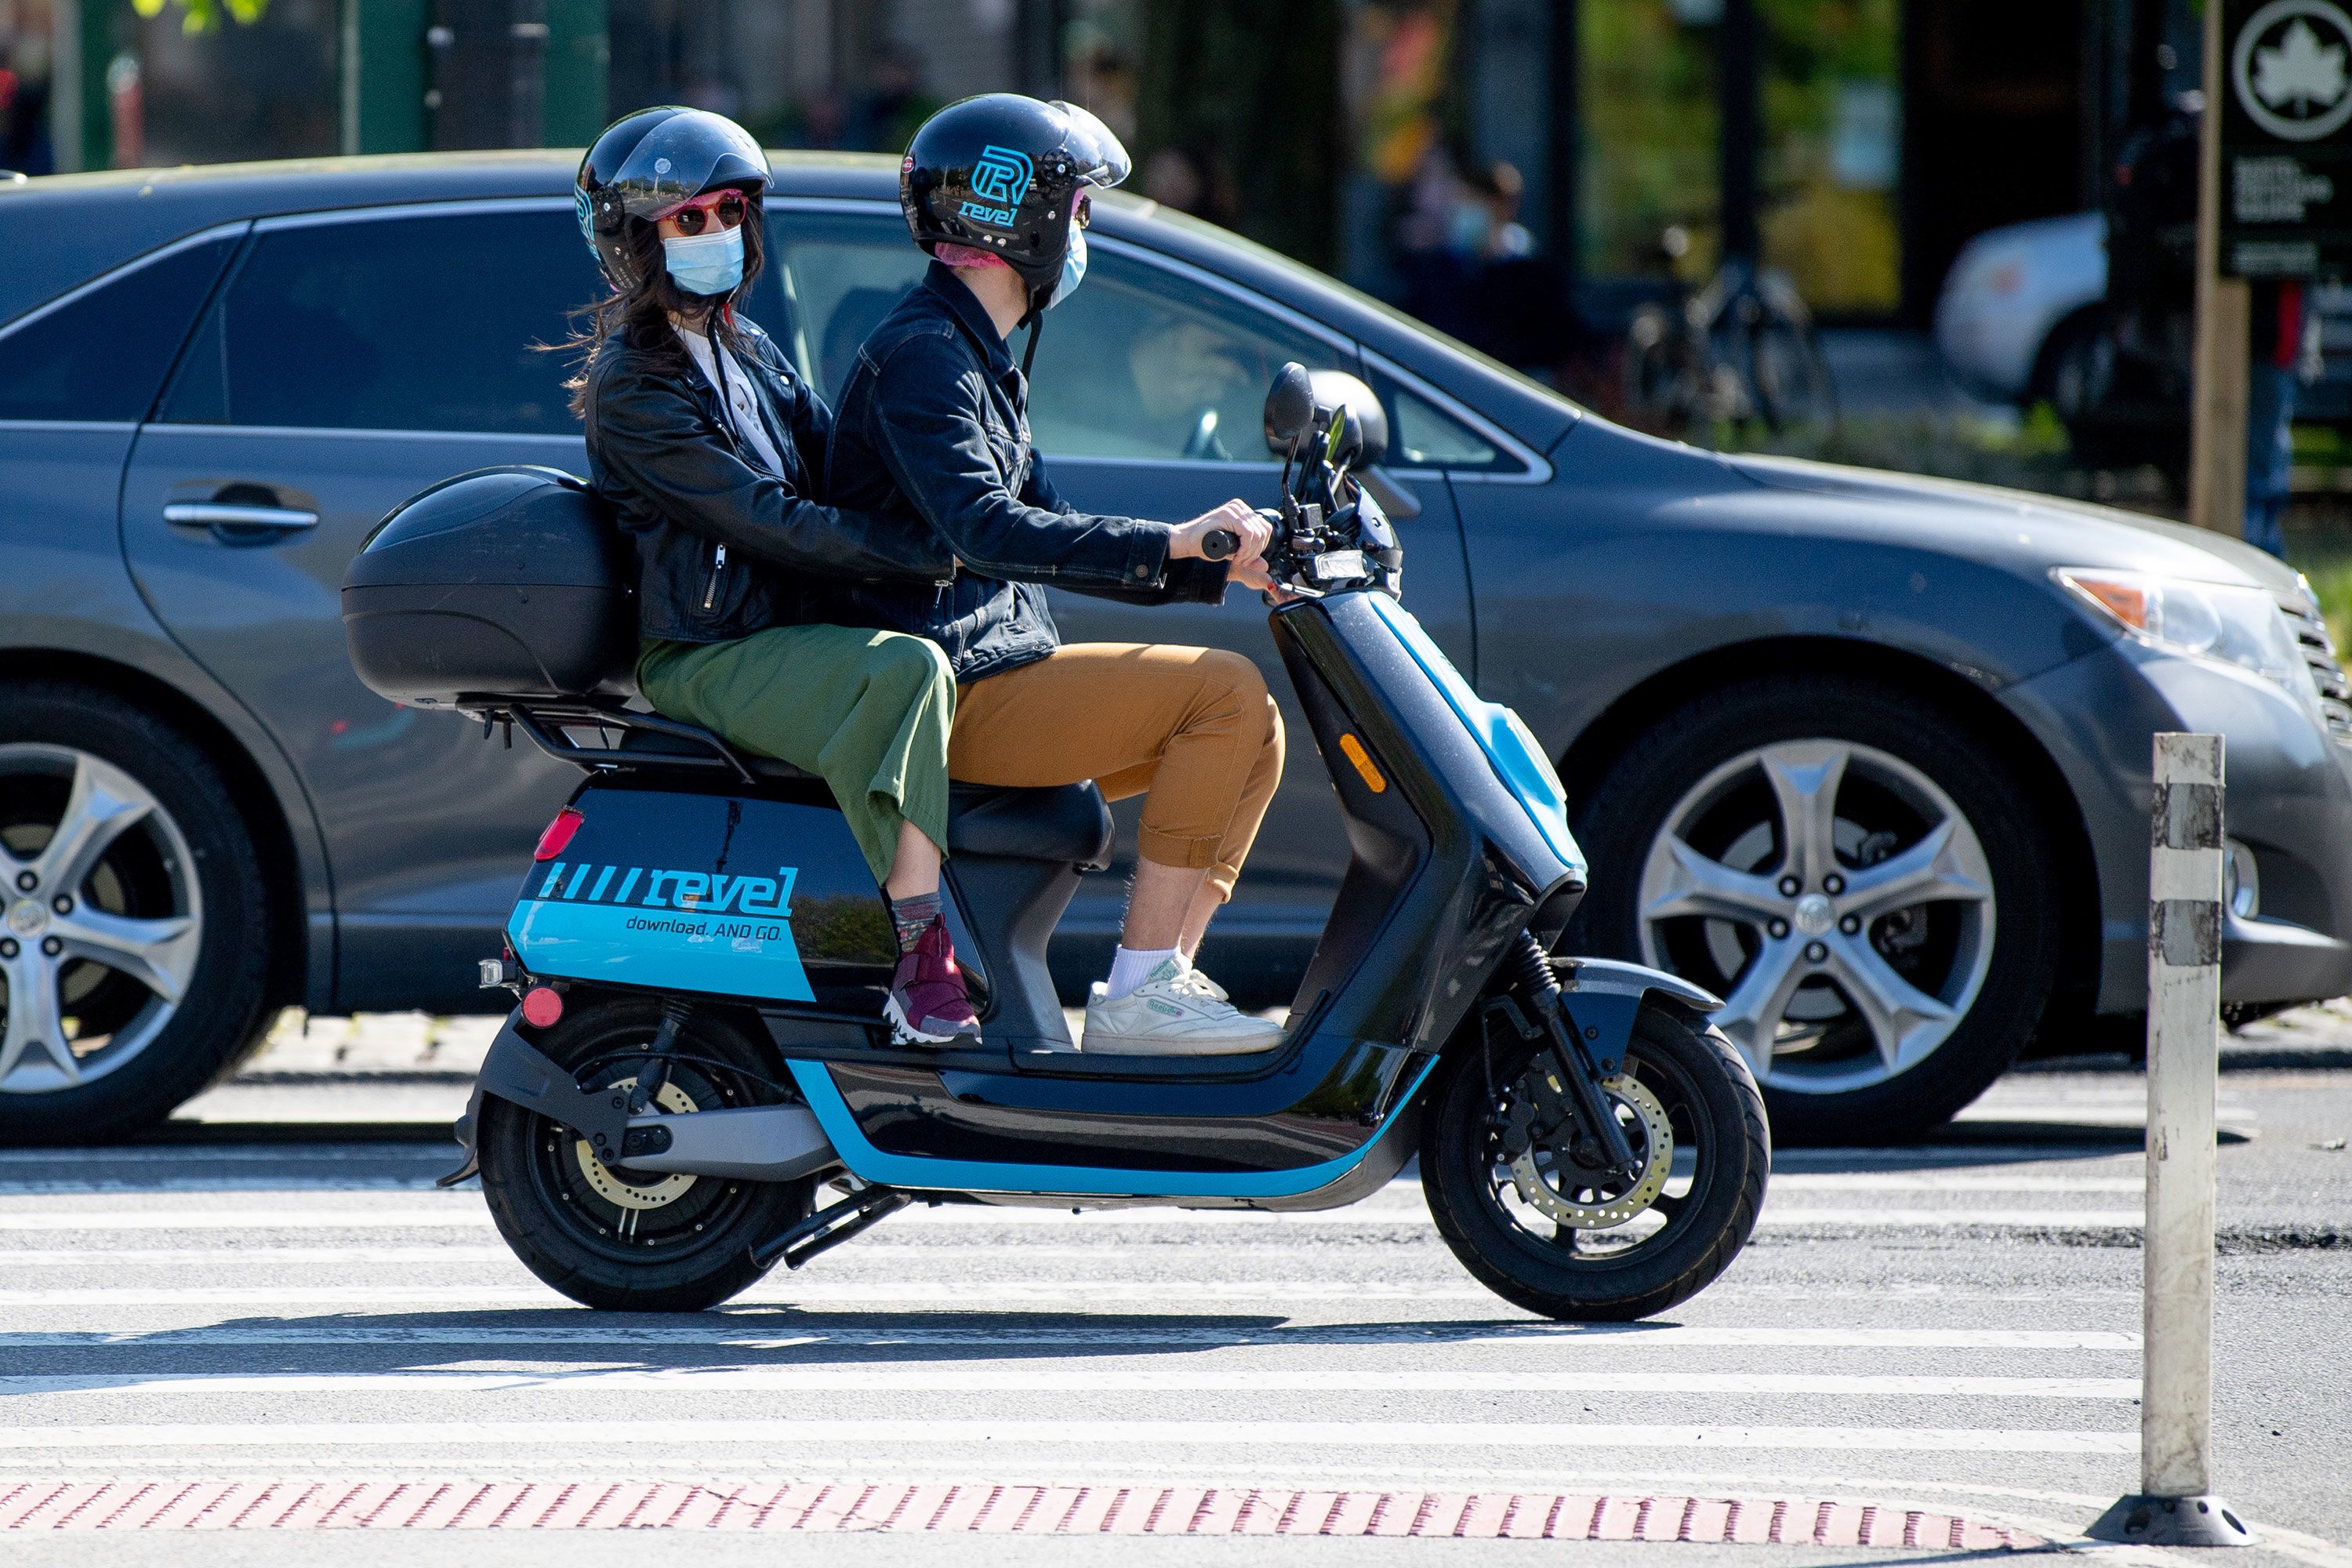 Revel's mopeds find a role during pandemic, but safety issues emerge